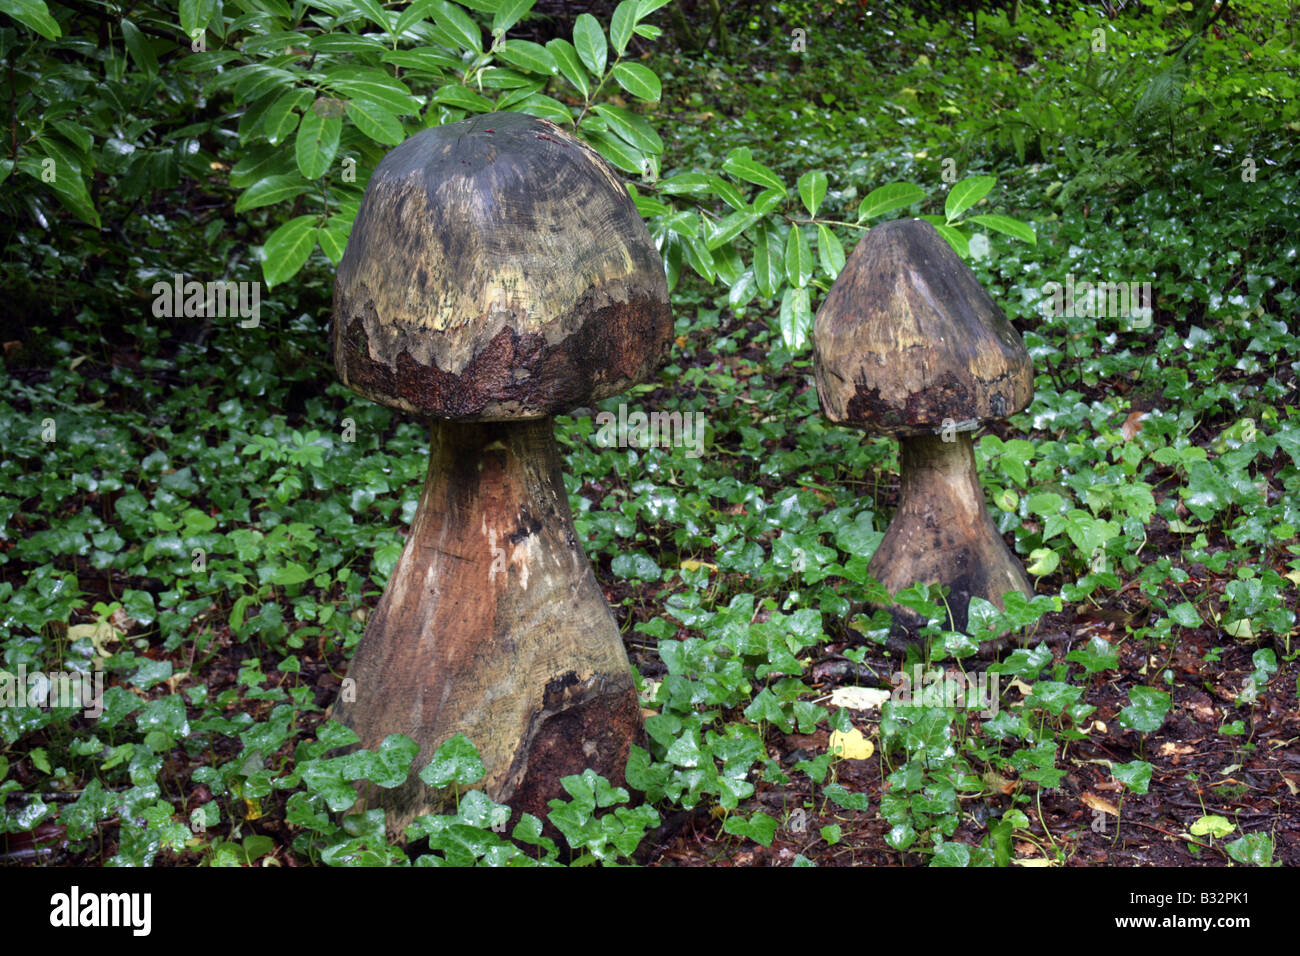 Carved Wooden Mushrooms As Garden Ornament In The Woodlands Of